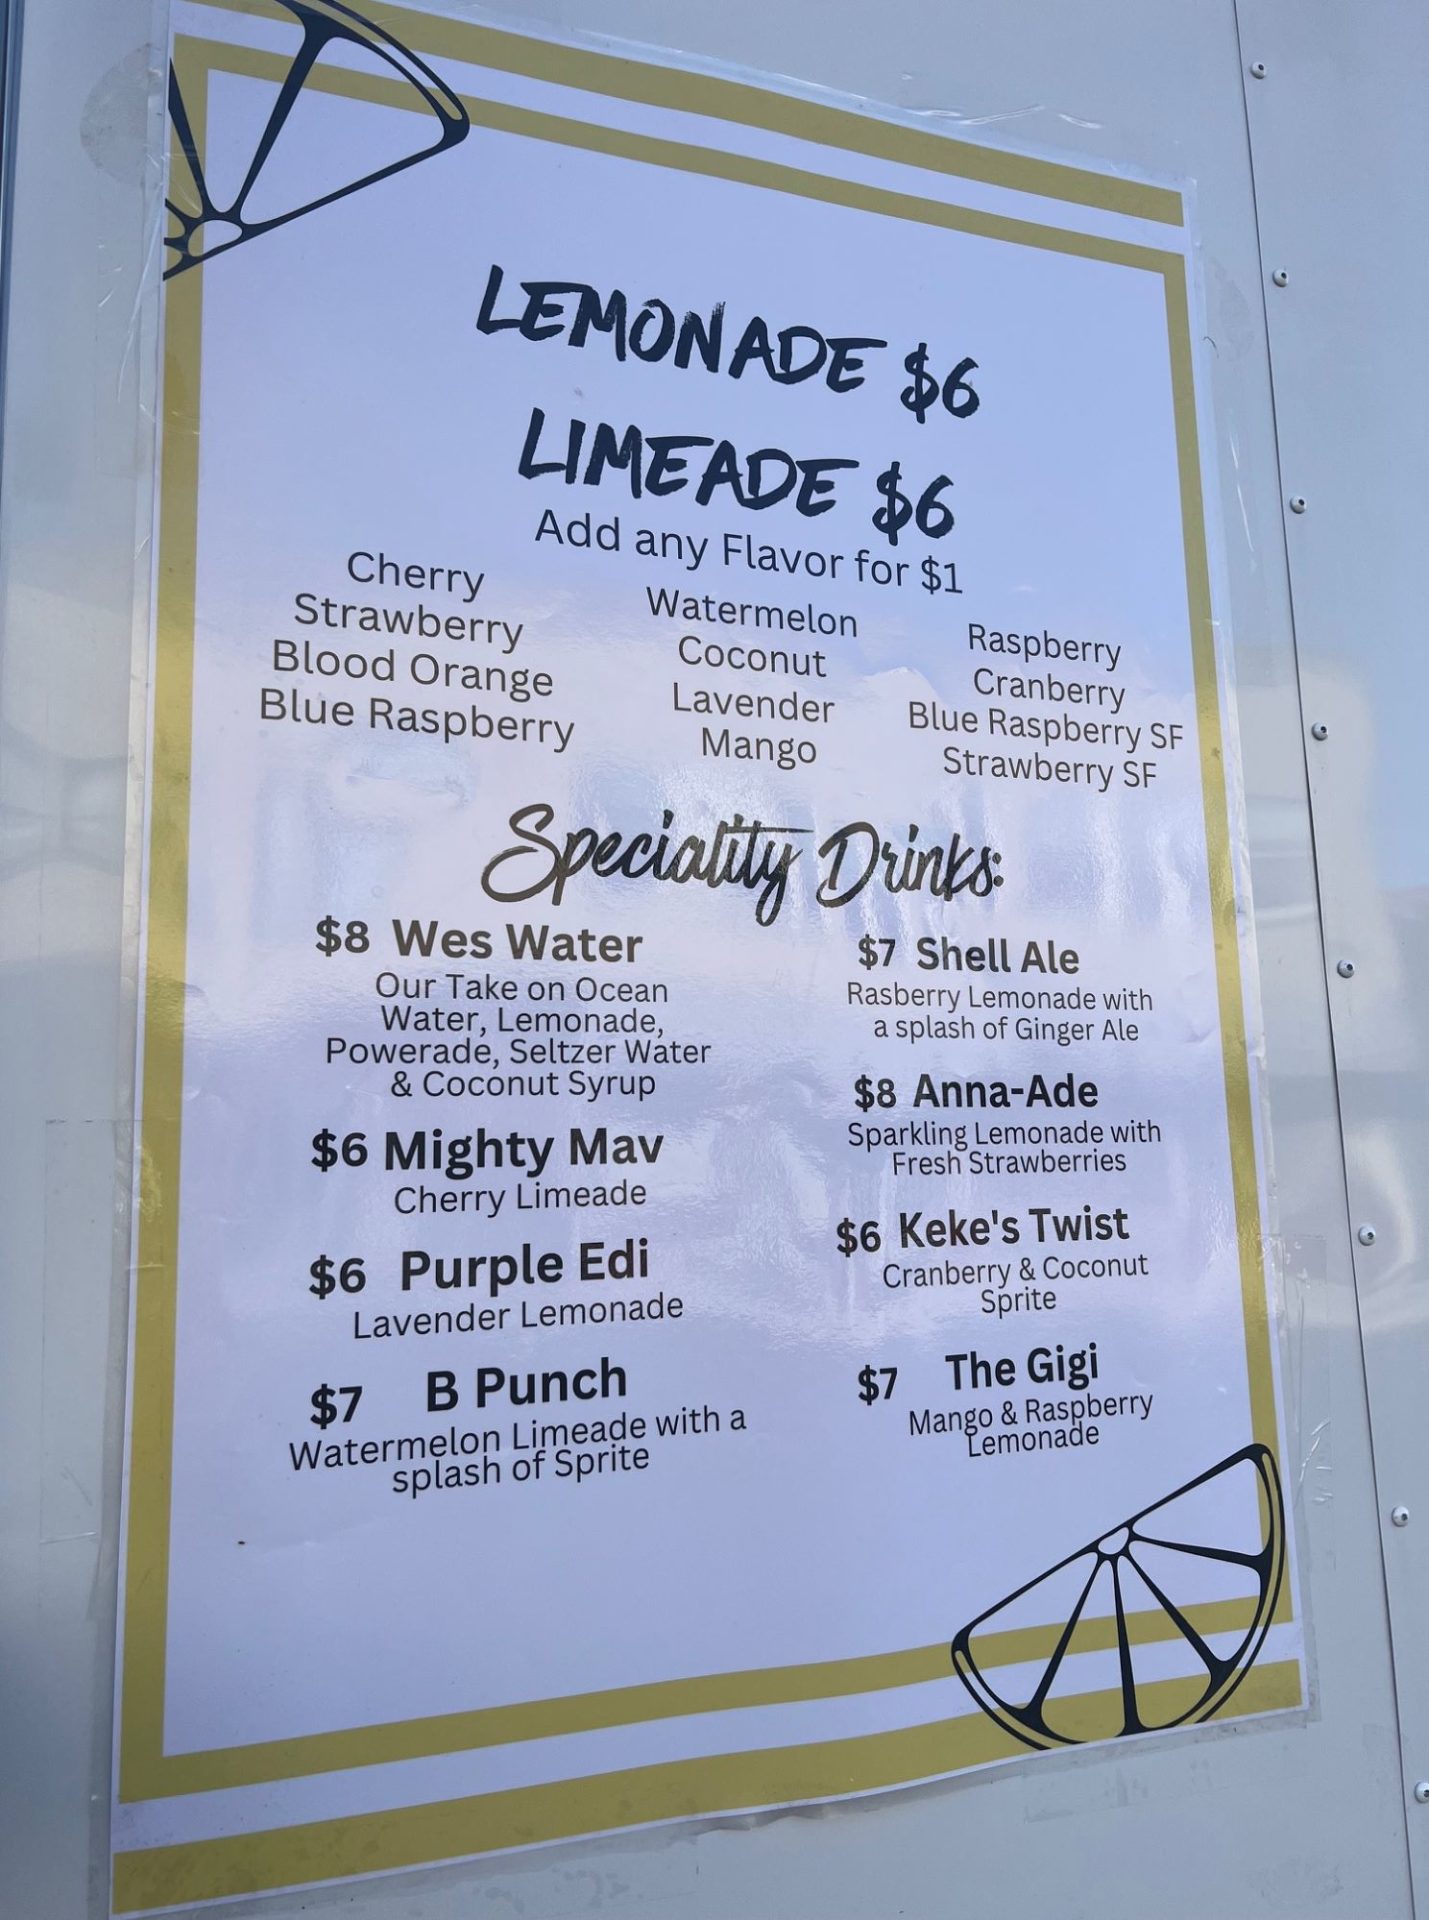 Menu poster taped to the side of a white truck, featuring Lemonade, Limeade, and a variety of drink options. 